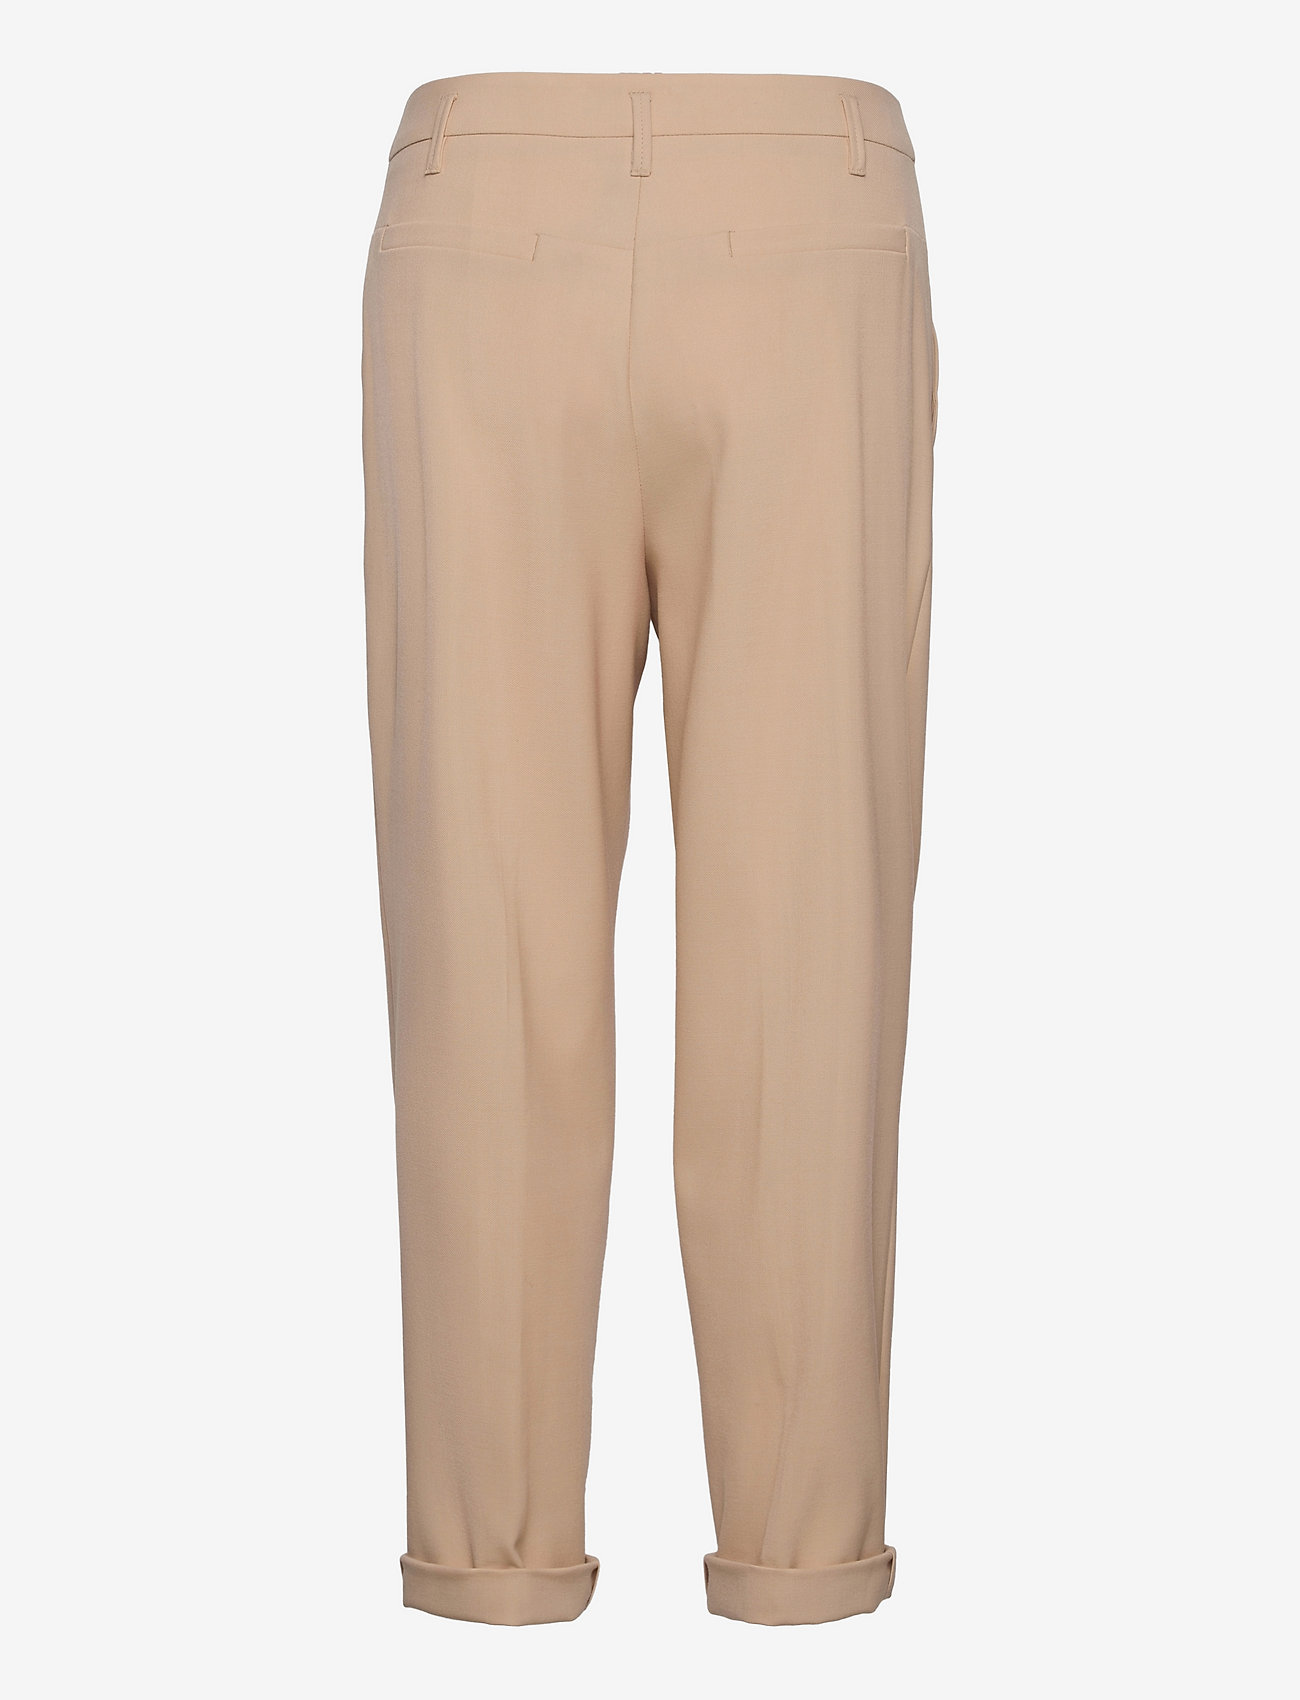 Dorothee Schumacher - THE NEW AMBITION pants - formell - apricot beige - 1